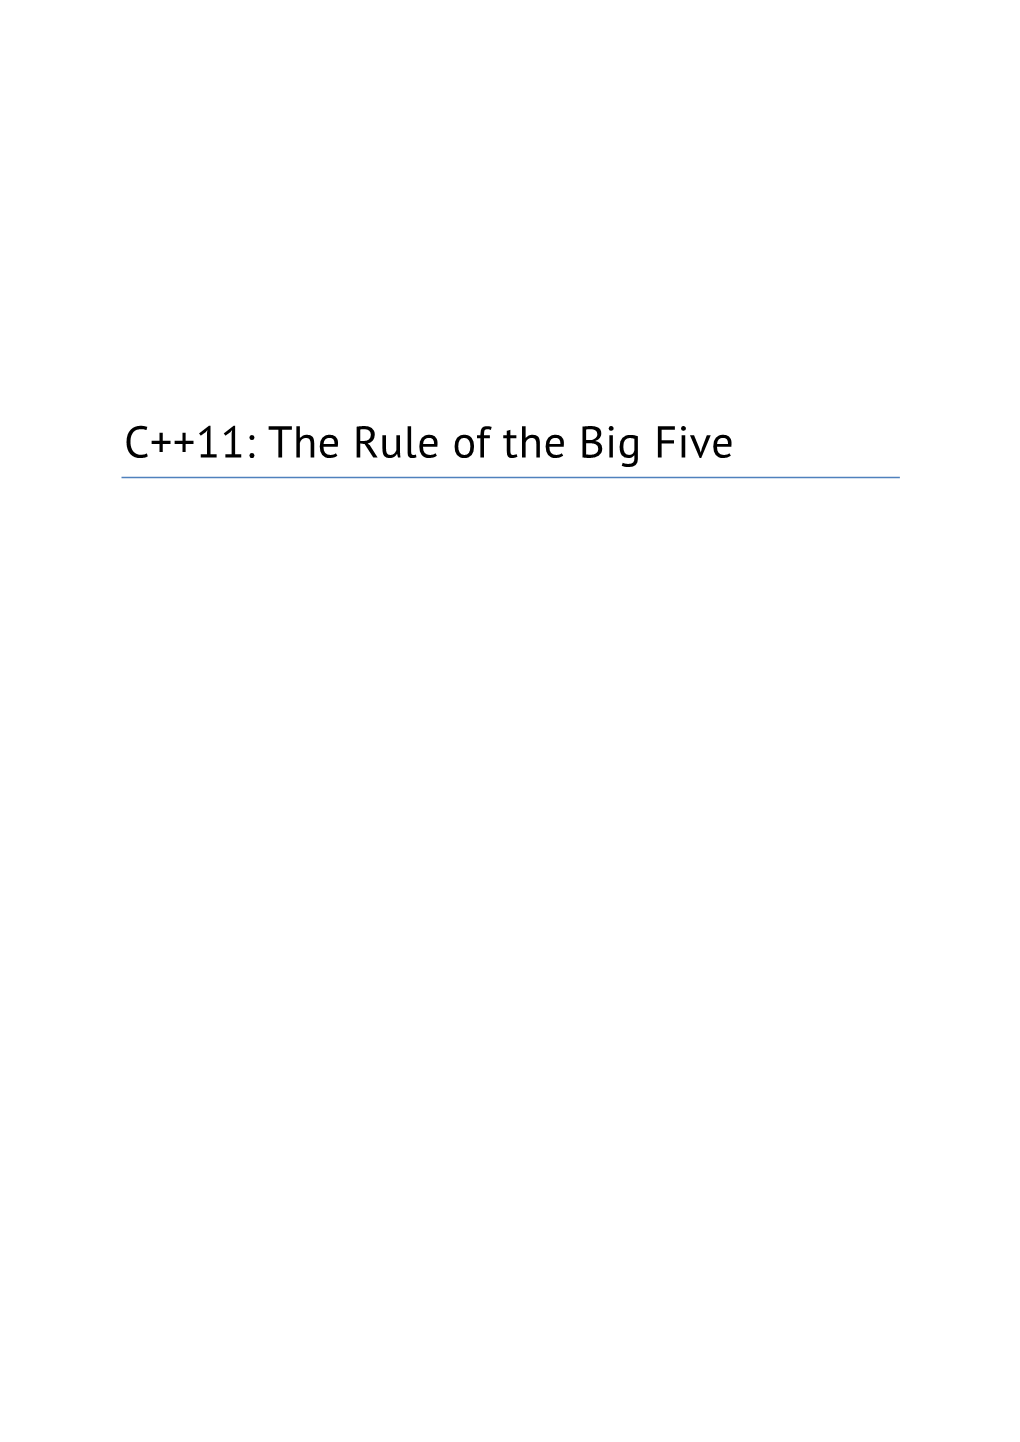 The Rule of the Big Five